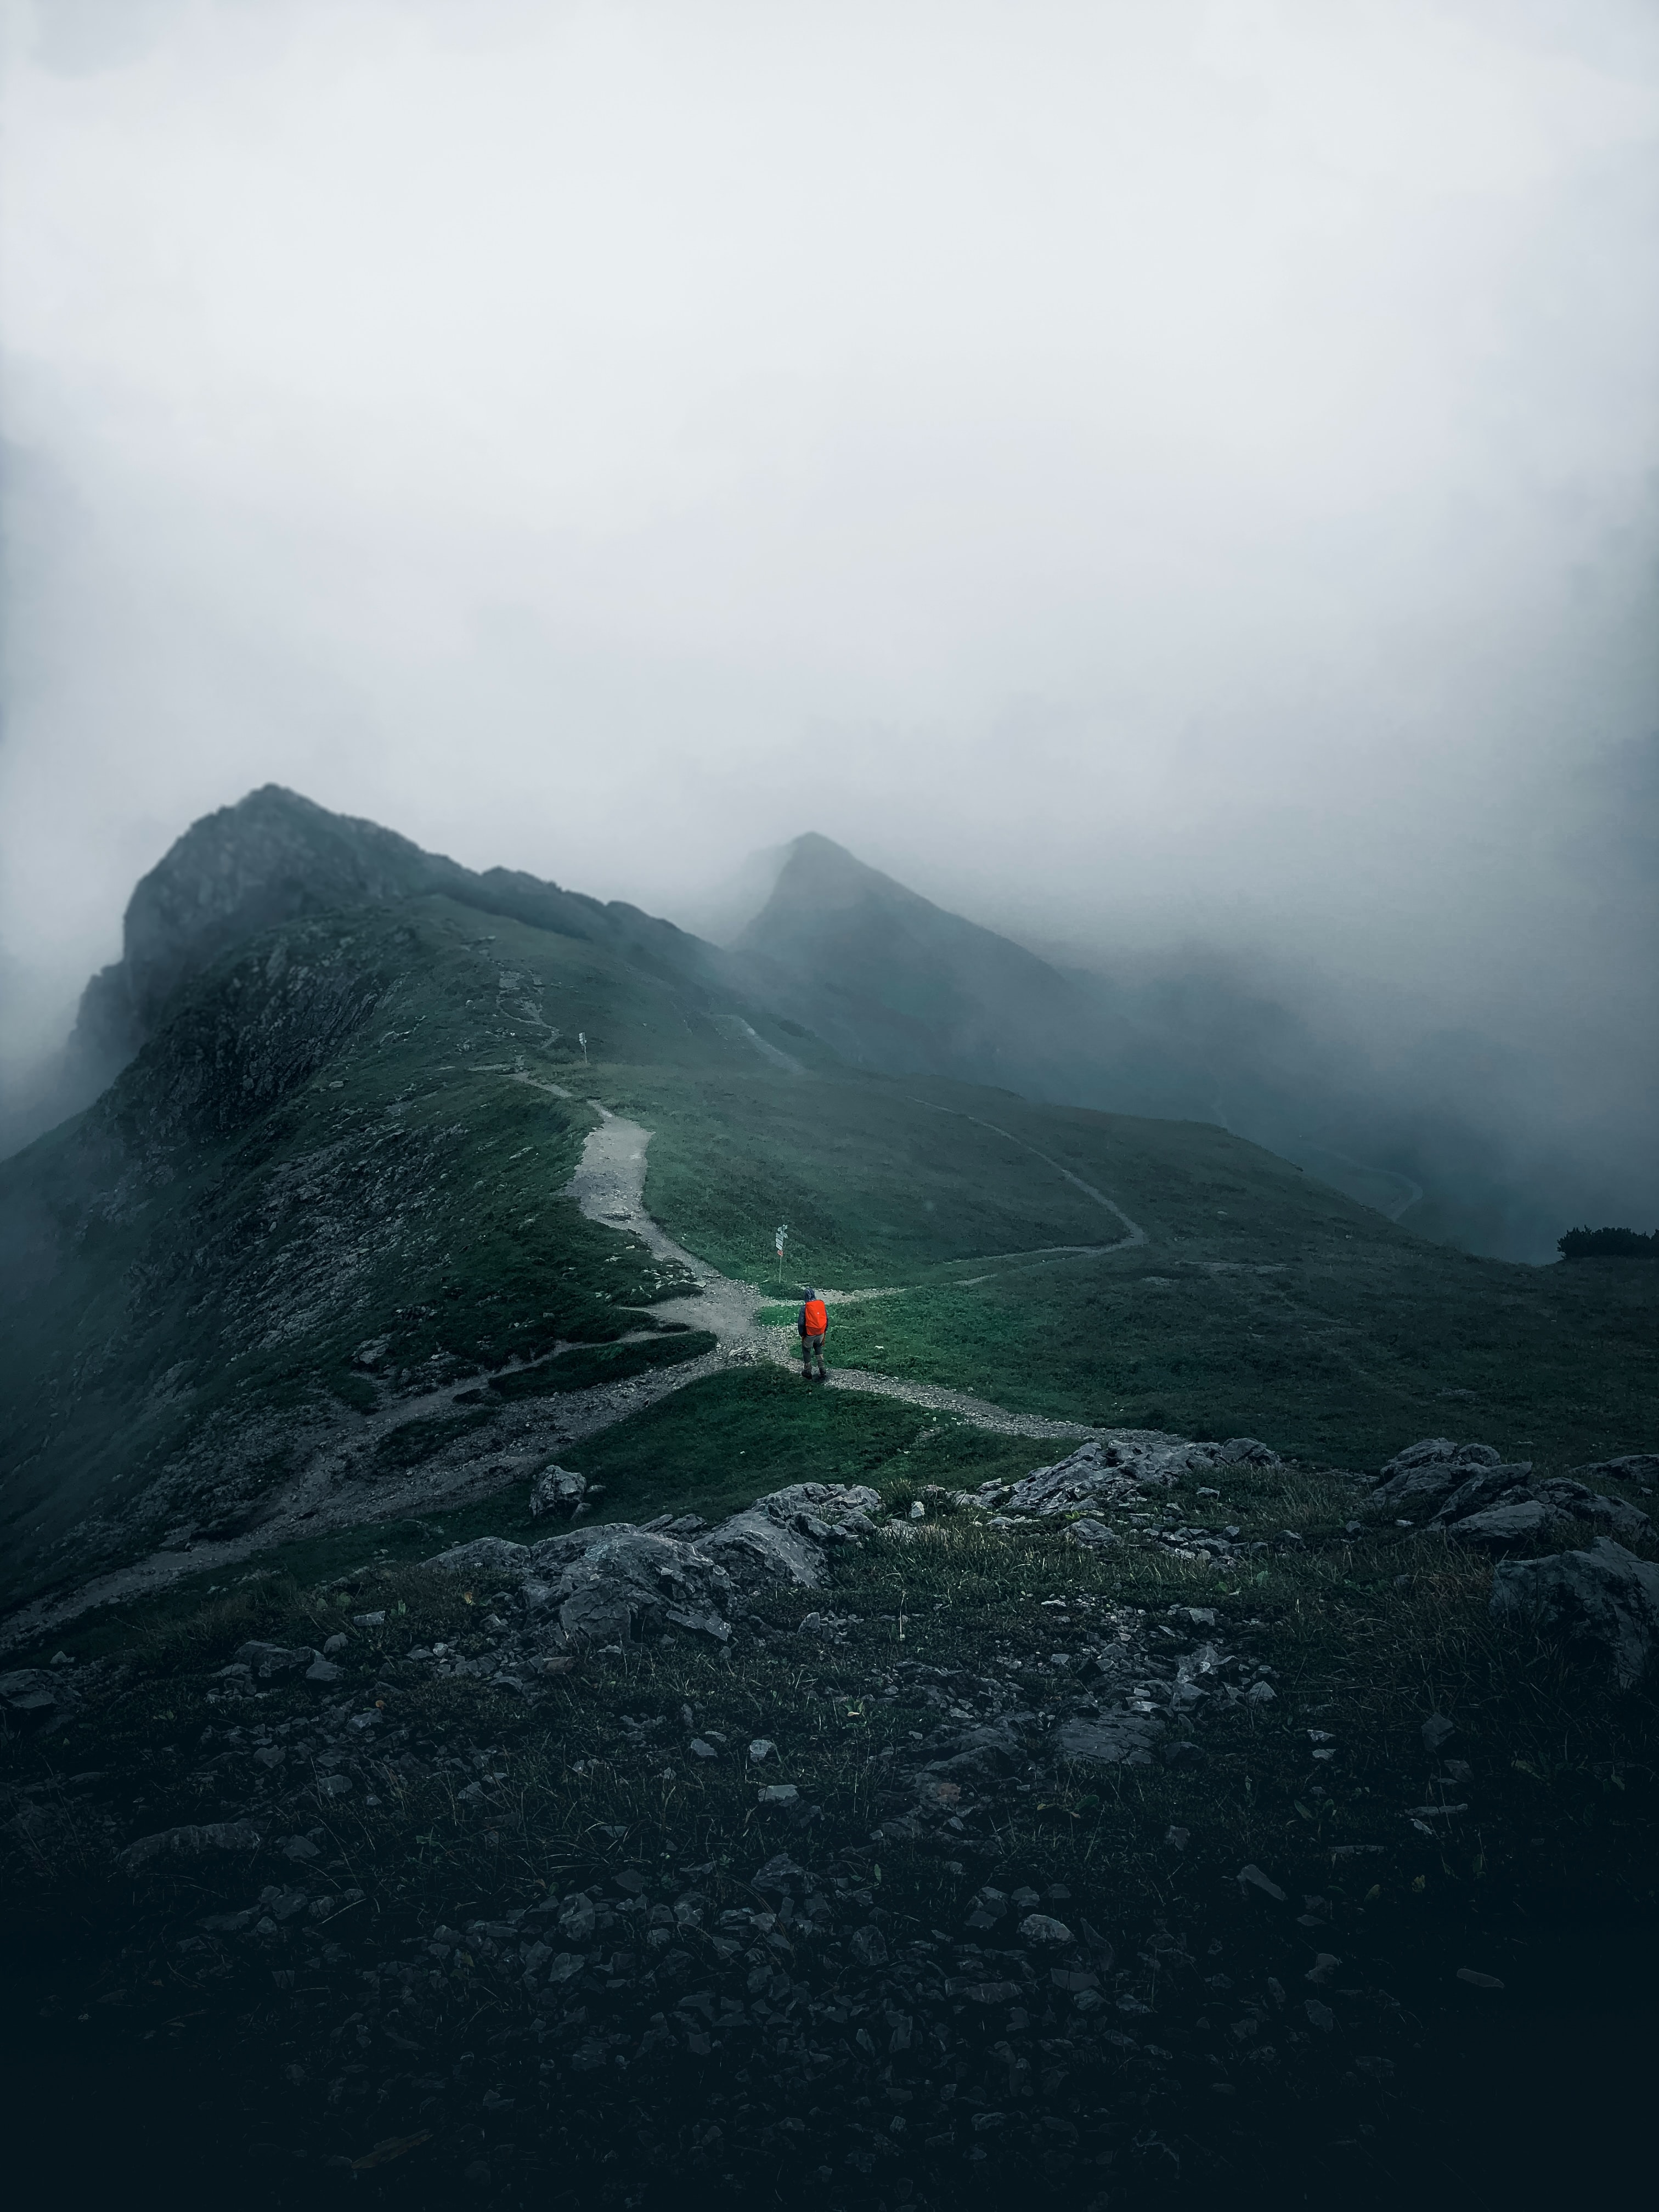 127582 Screensavers and Wallpapers Journey for phone. Download mountains, miscellanea, miscellaneous, fog, journey, loneliness, alone, lonely, traveler, traveller pictures for free